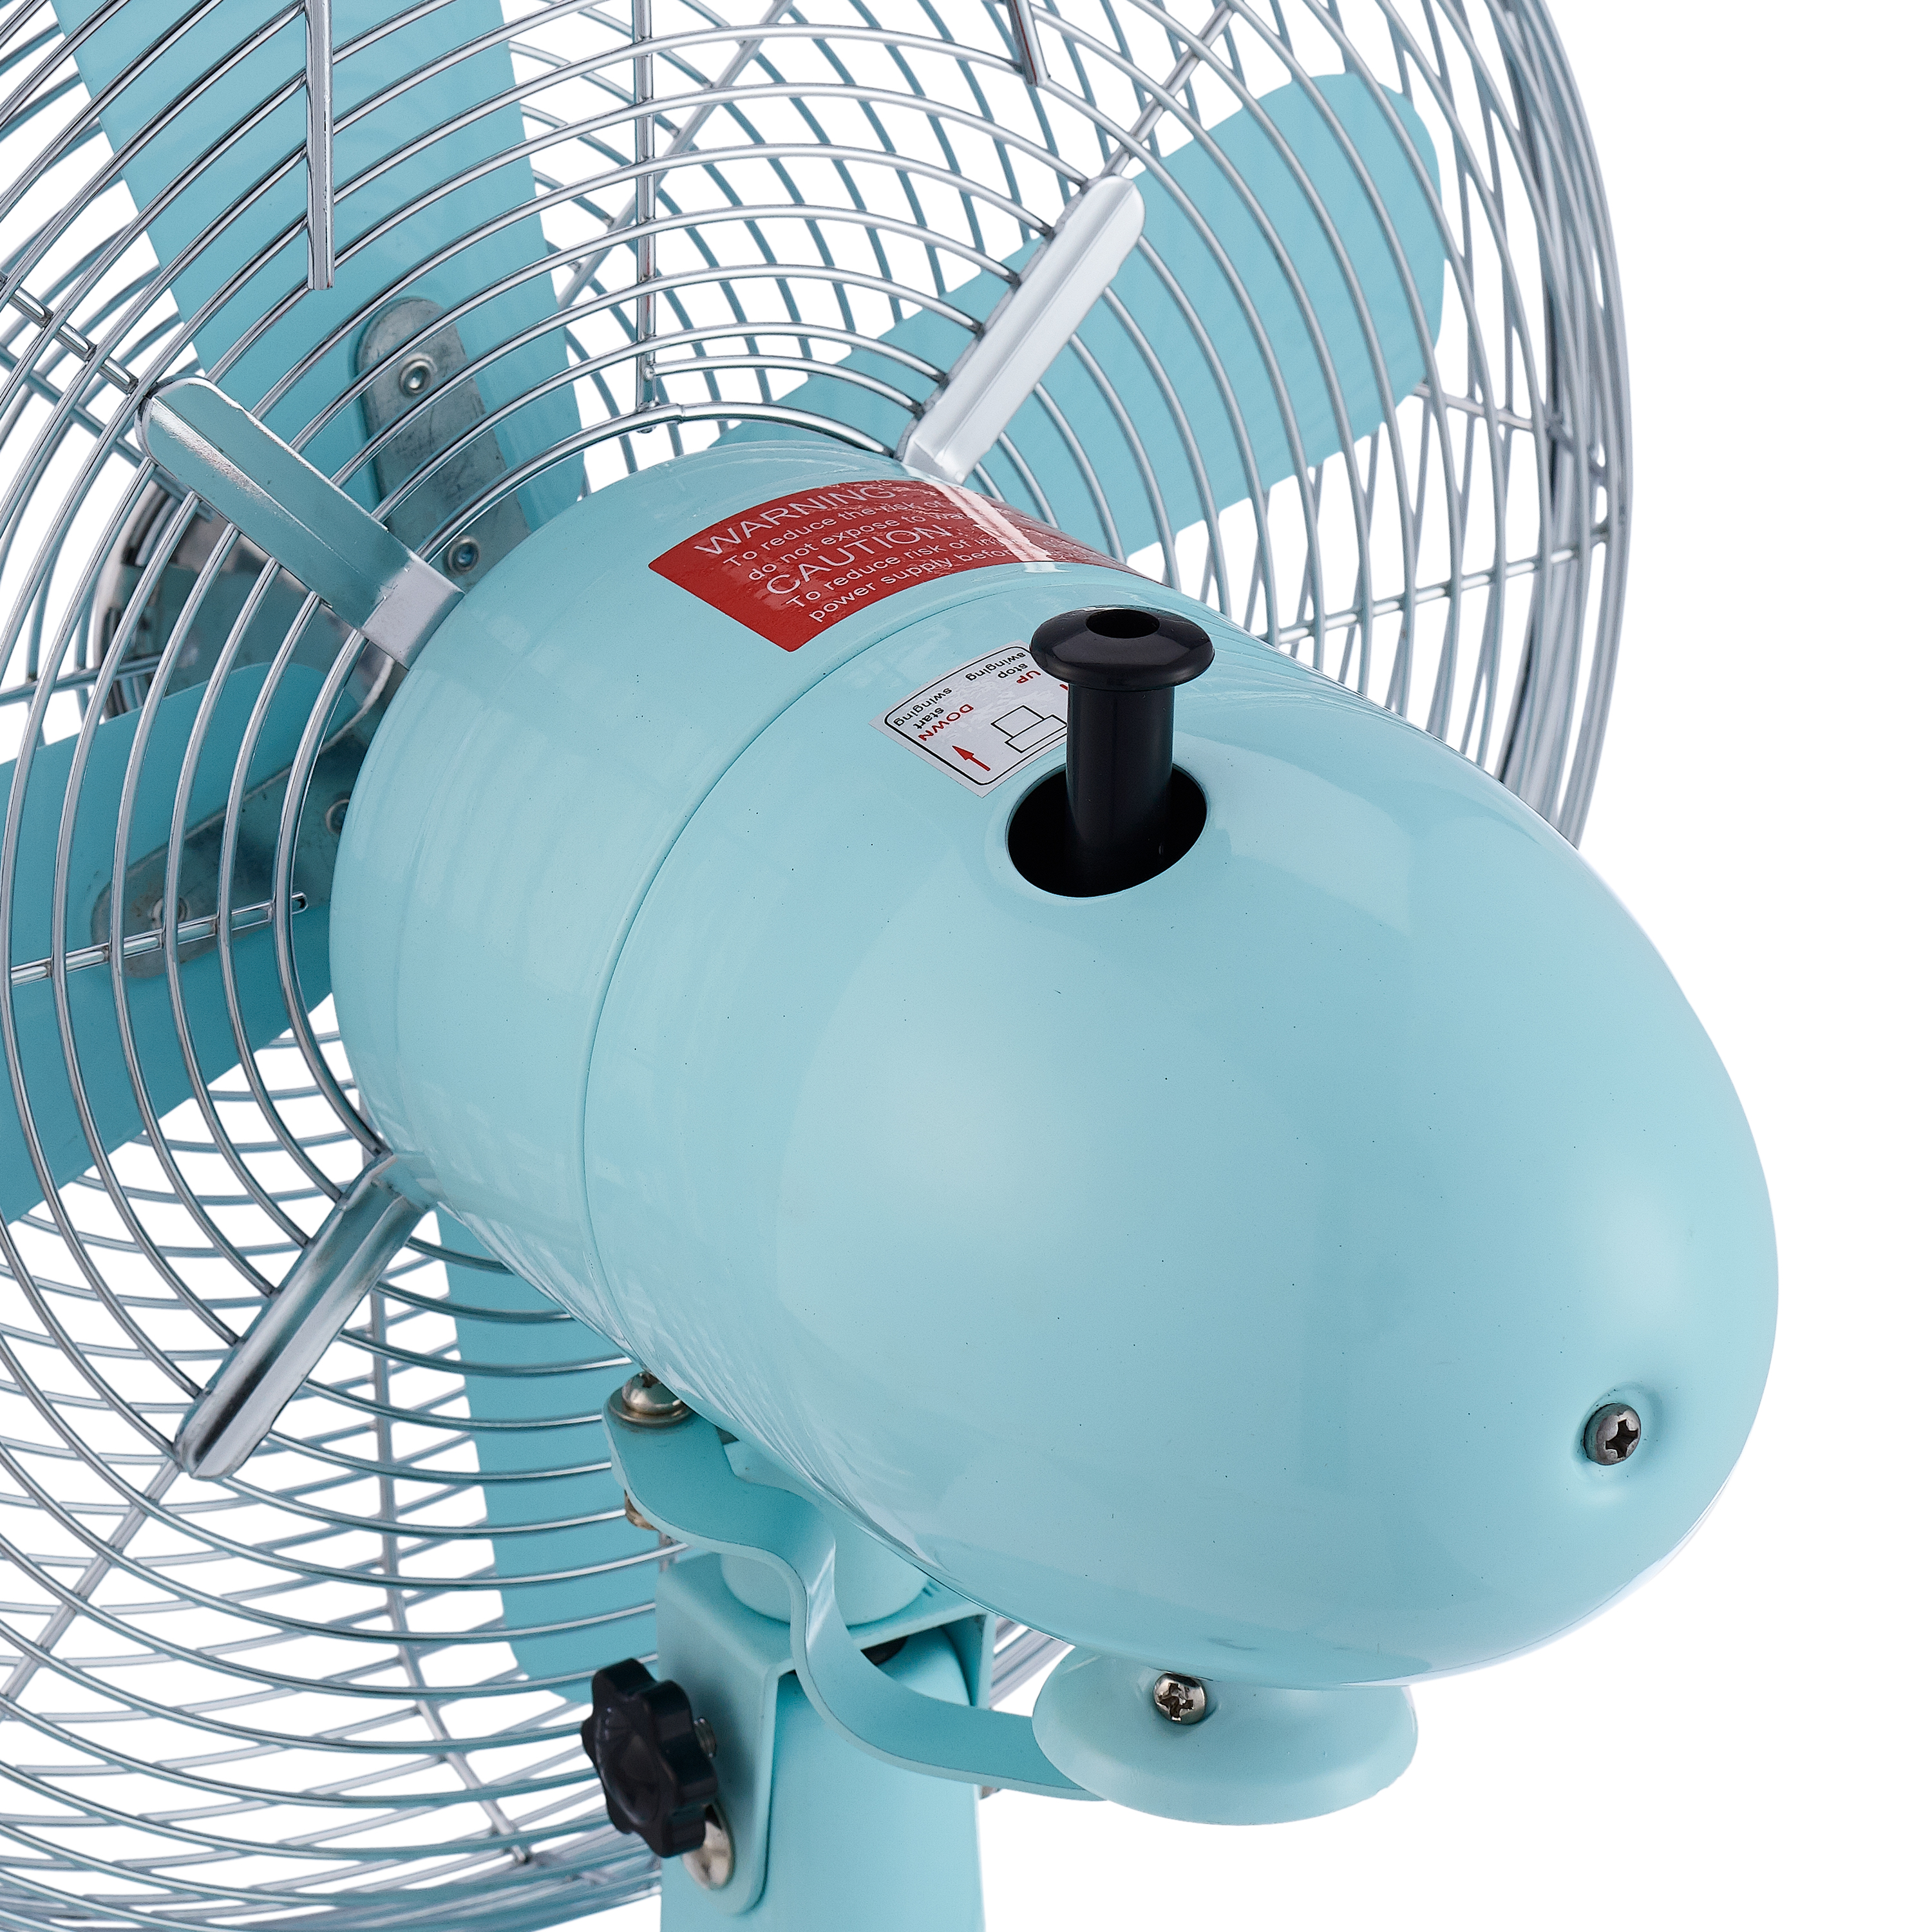 Better Homes & Gardens New 12 inch Retro 3-Speed Metal Tilted-Head Oscillation Table Fan Mint - image 5 of 8